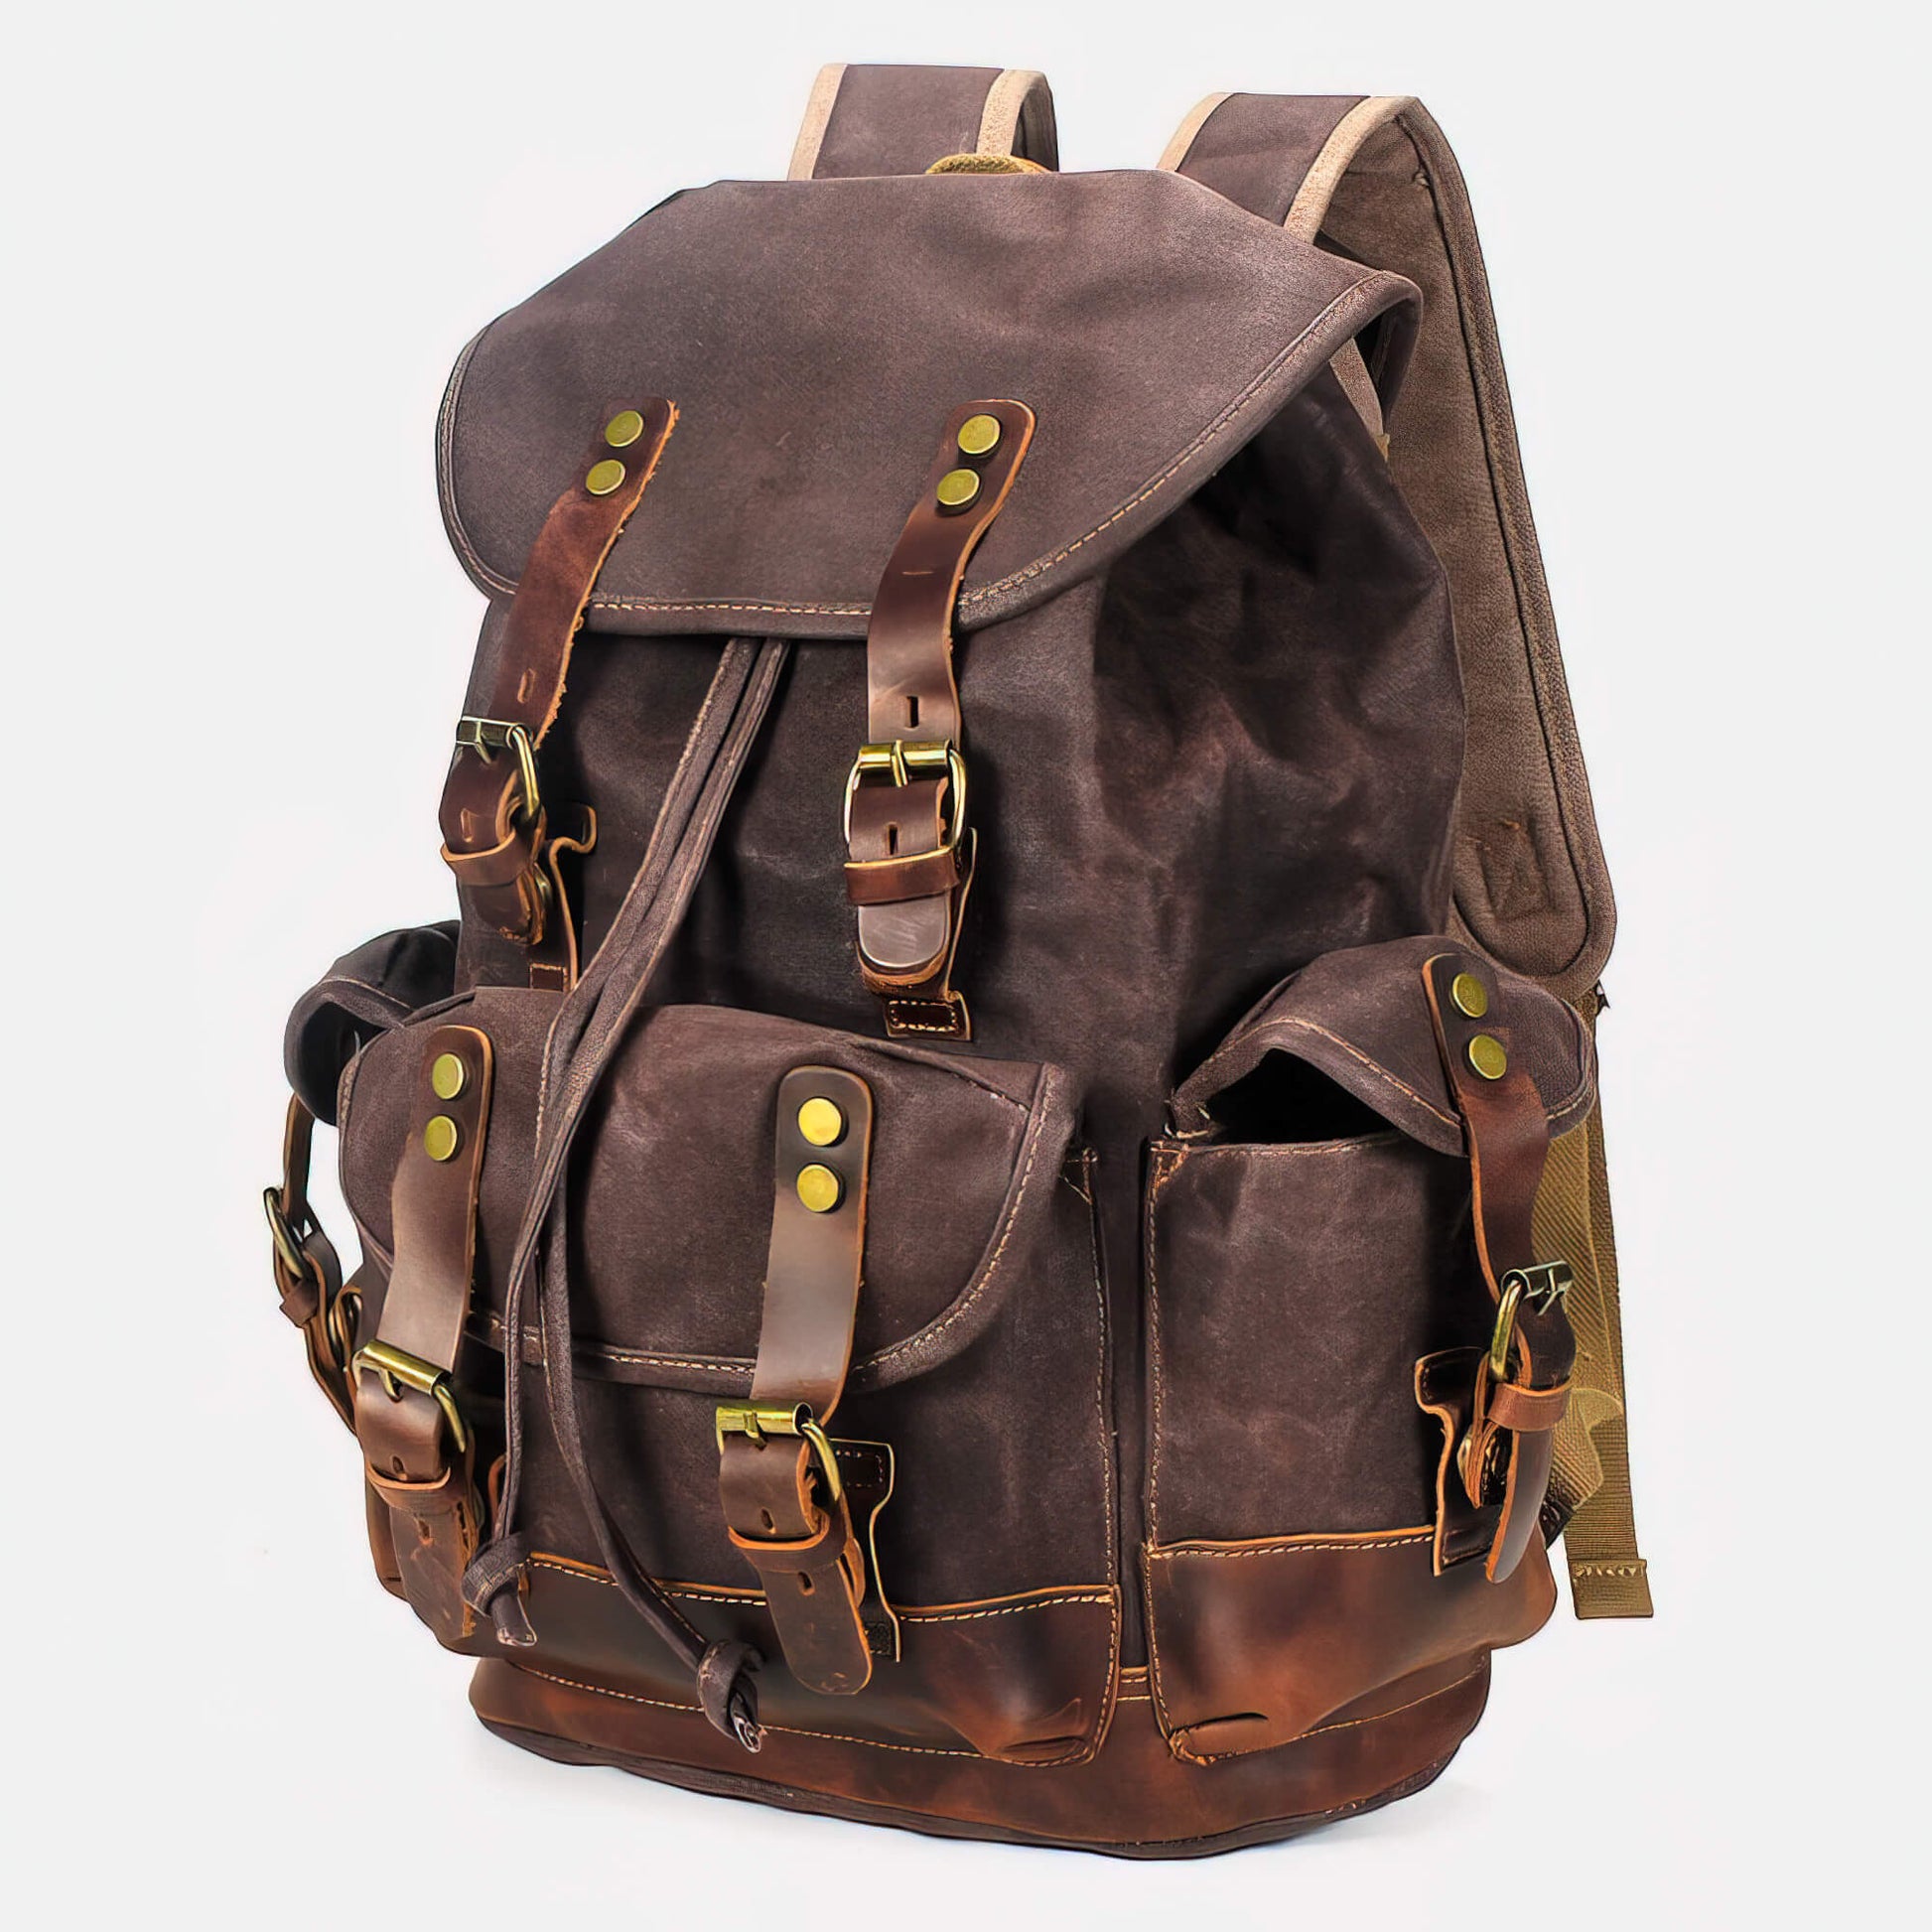 Waterproof Waxed Canvas Backpack, Leather, Vintage, Outdoor